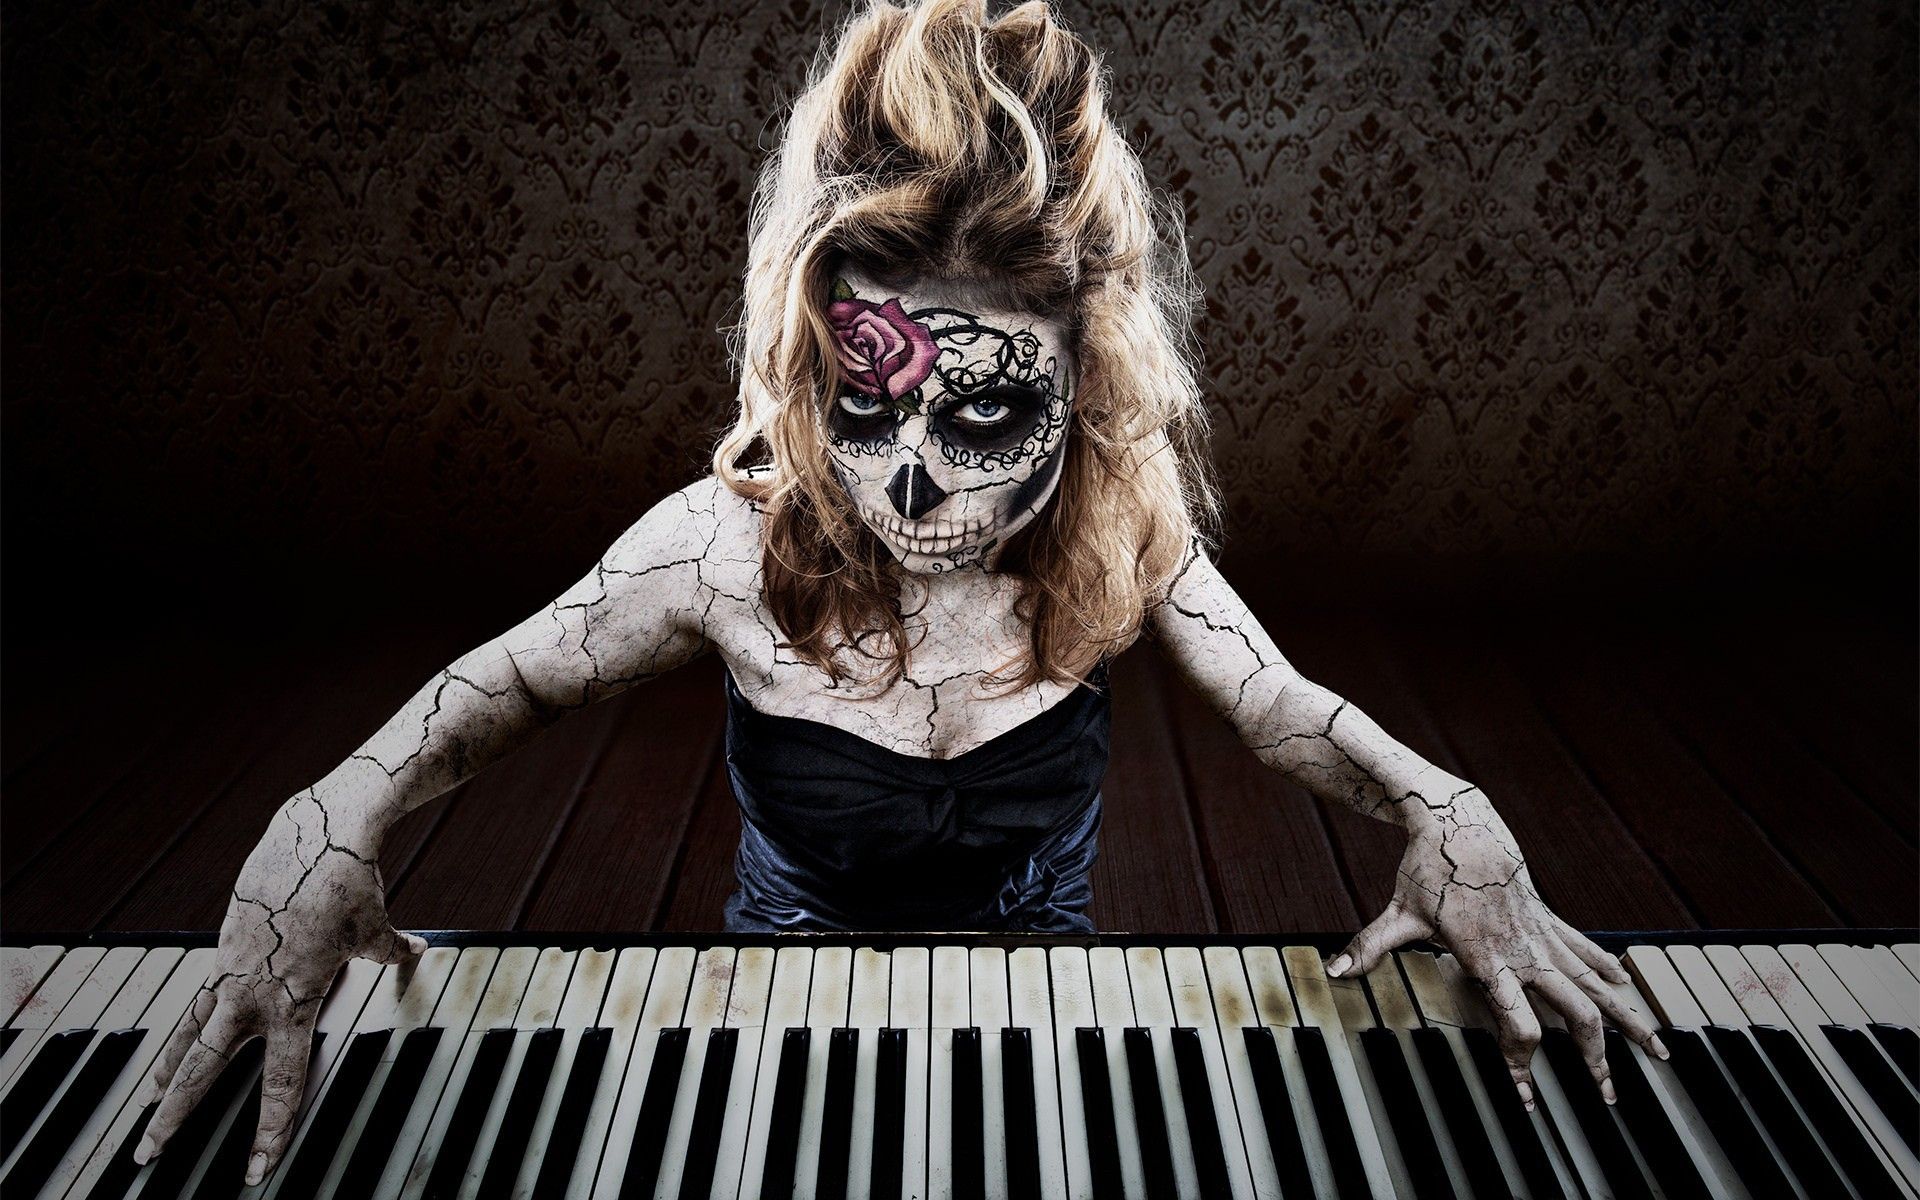 Tattooed girl playing the piano wallpaper and image, picture, photo